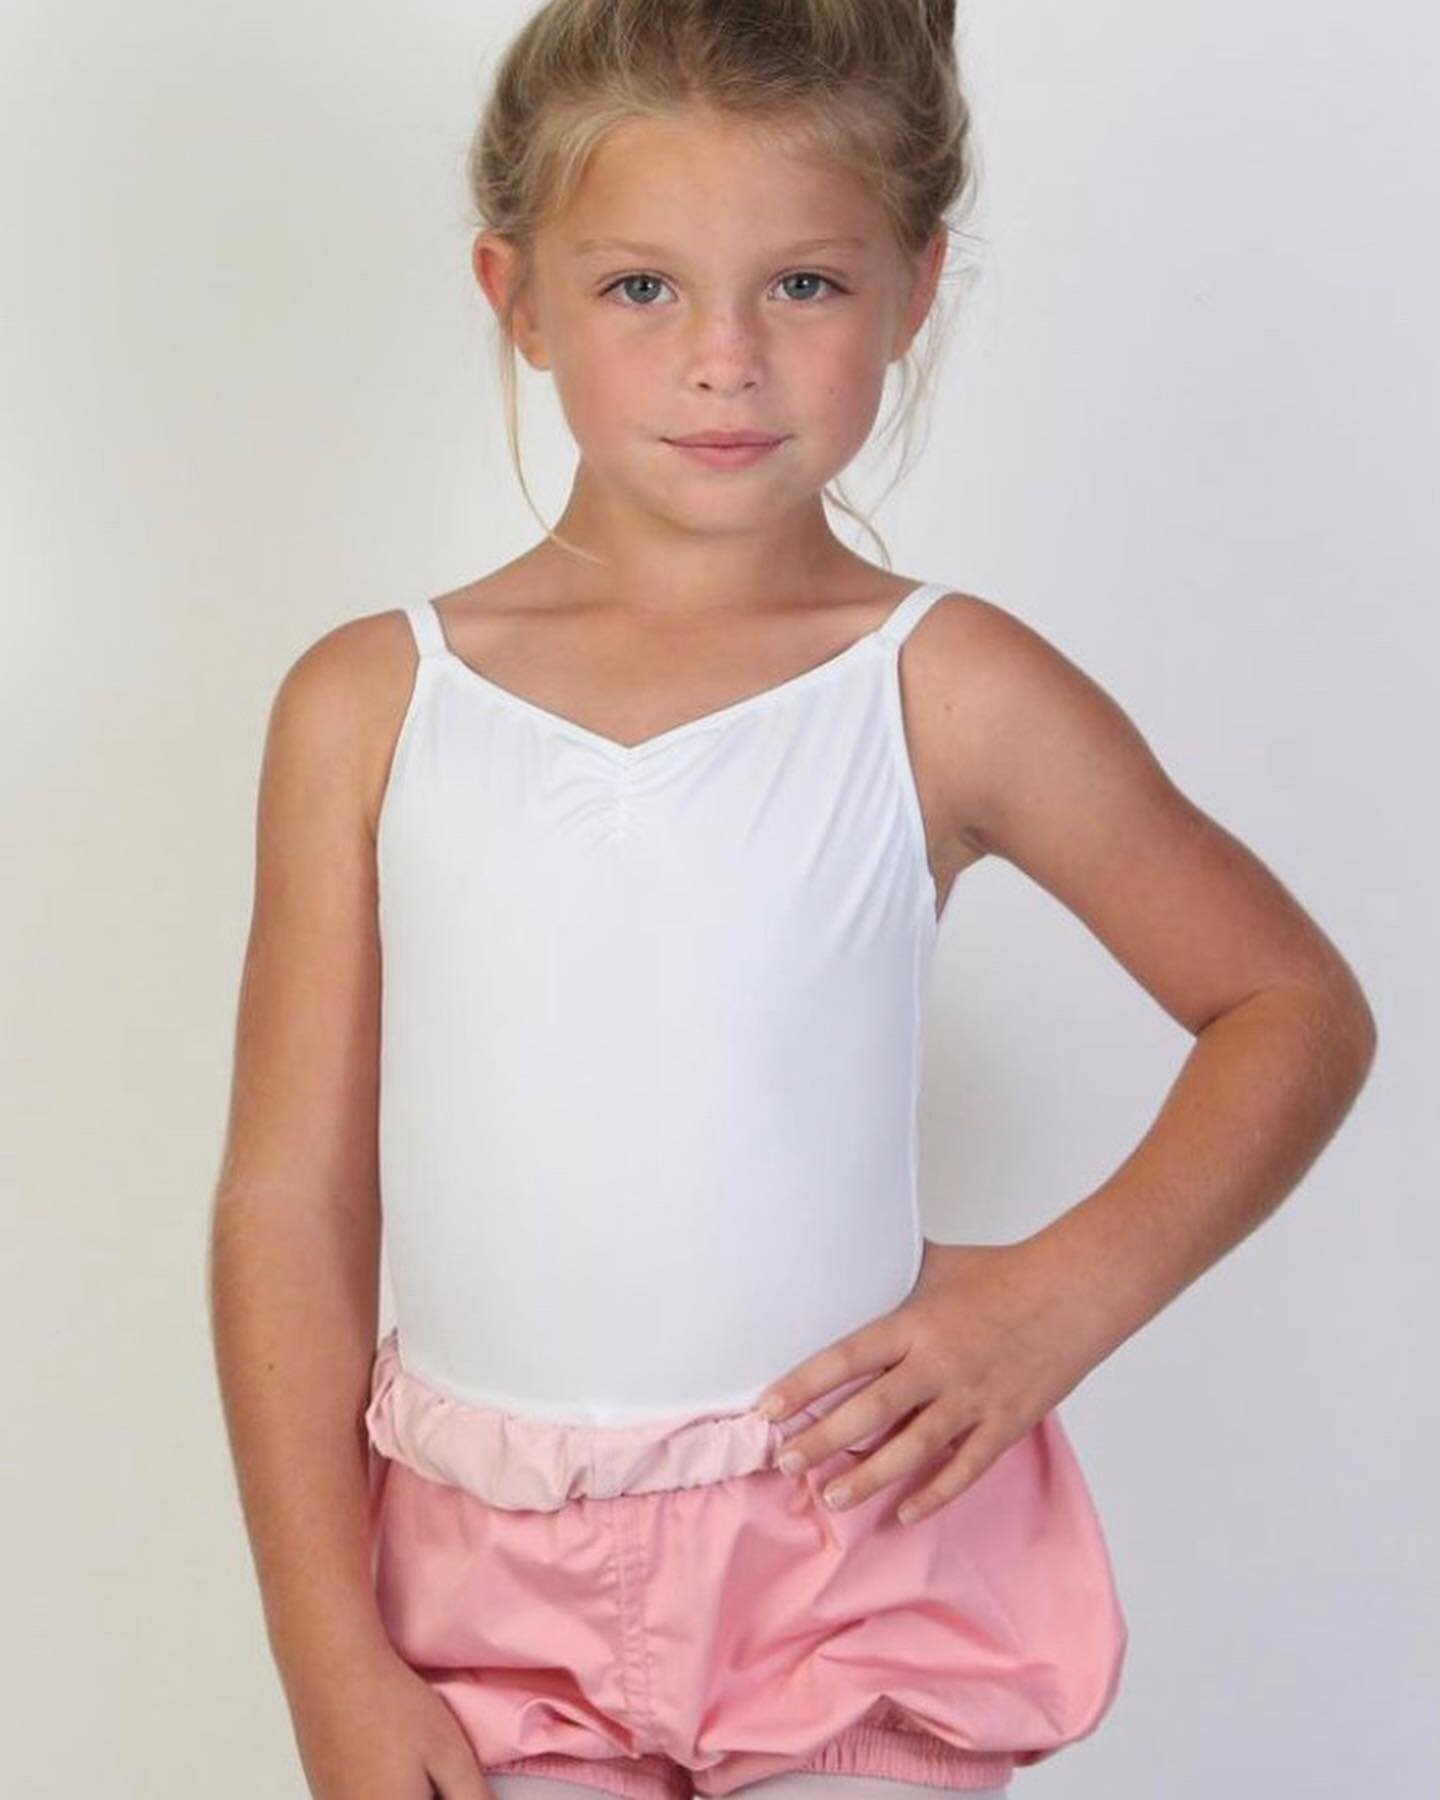 KID SIZES AVAILABLE! Come shop now for all your little dancers essentials. Ballet shoes, Jazz shoes , Character shoes, Nikolay Leotards, Bullet pointe skirts, and much more! 

8507 McCullough Avenue, Suite C-9, San Antonio, TX 78216
(210) 362-1043

o